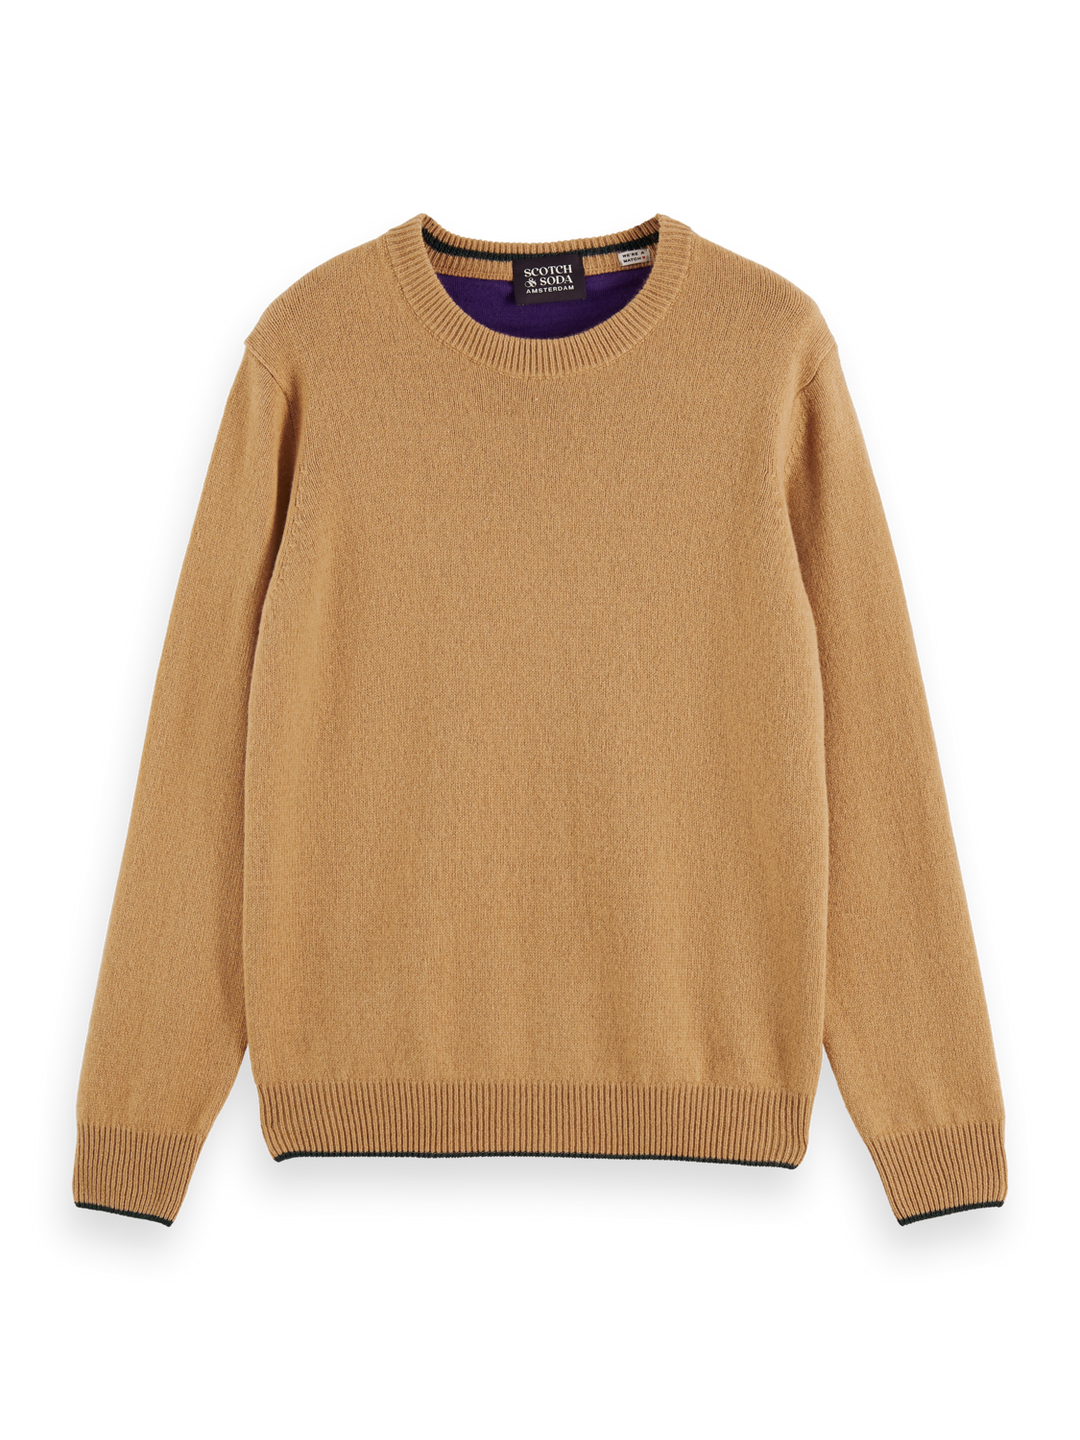 Recycled Cashmere Crewneck Sweater in Sand Melange | Buster McGee